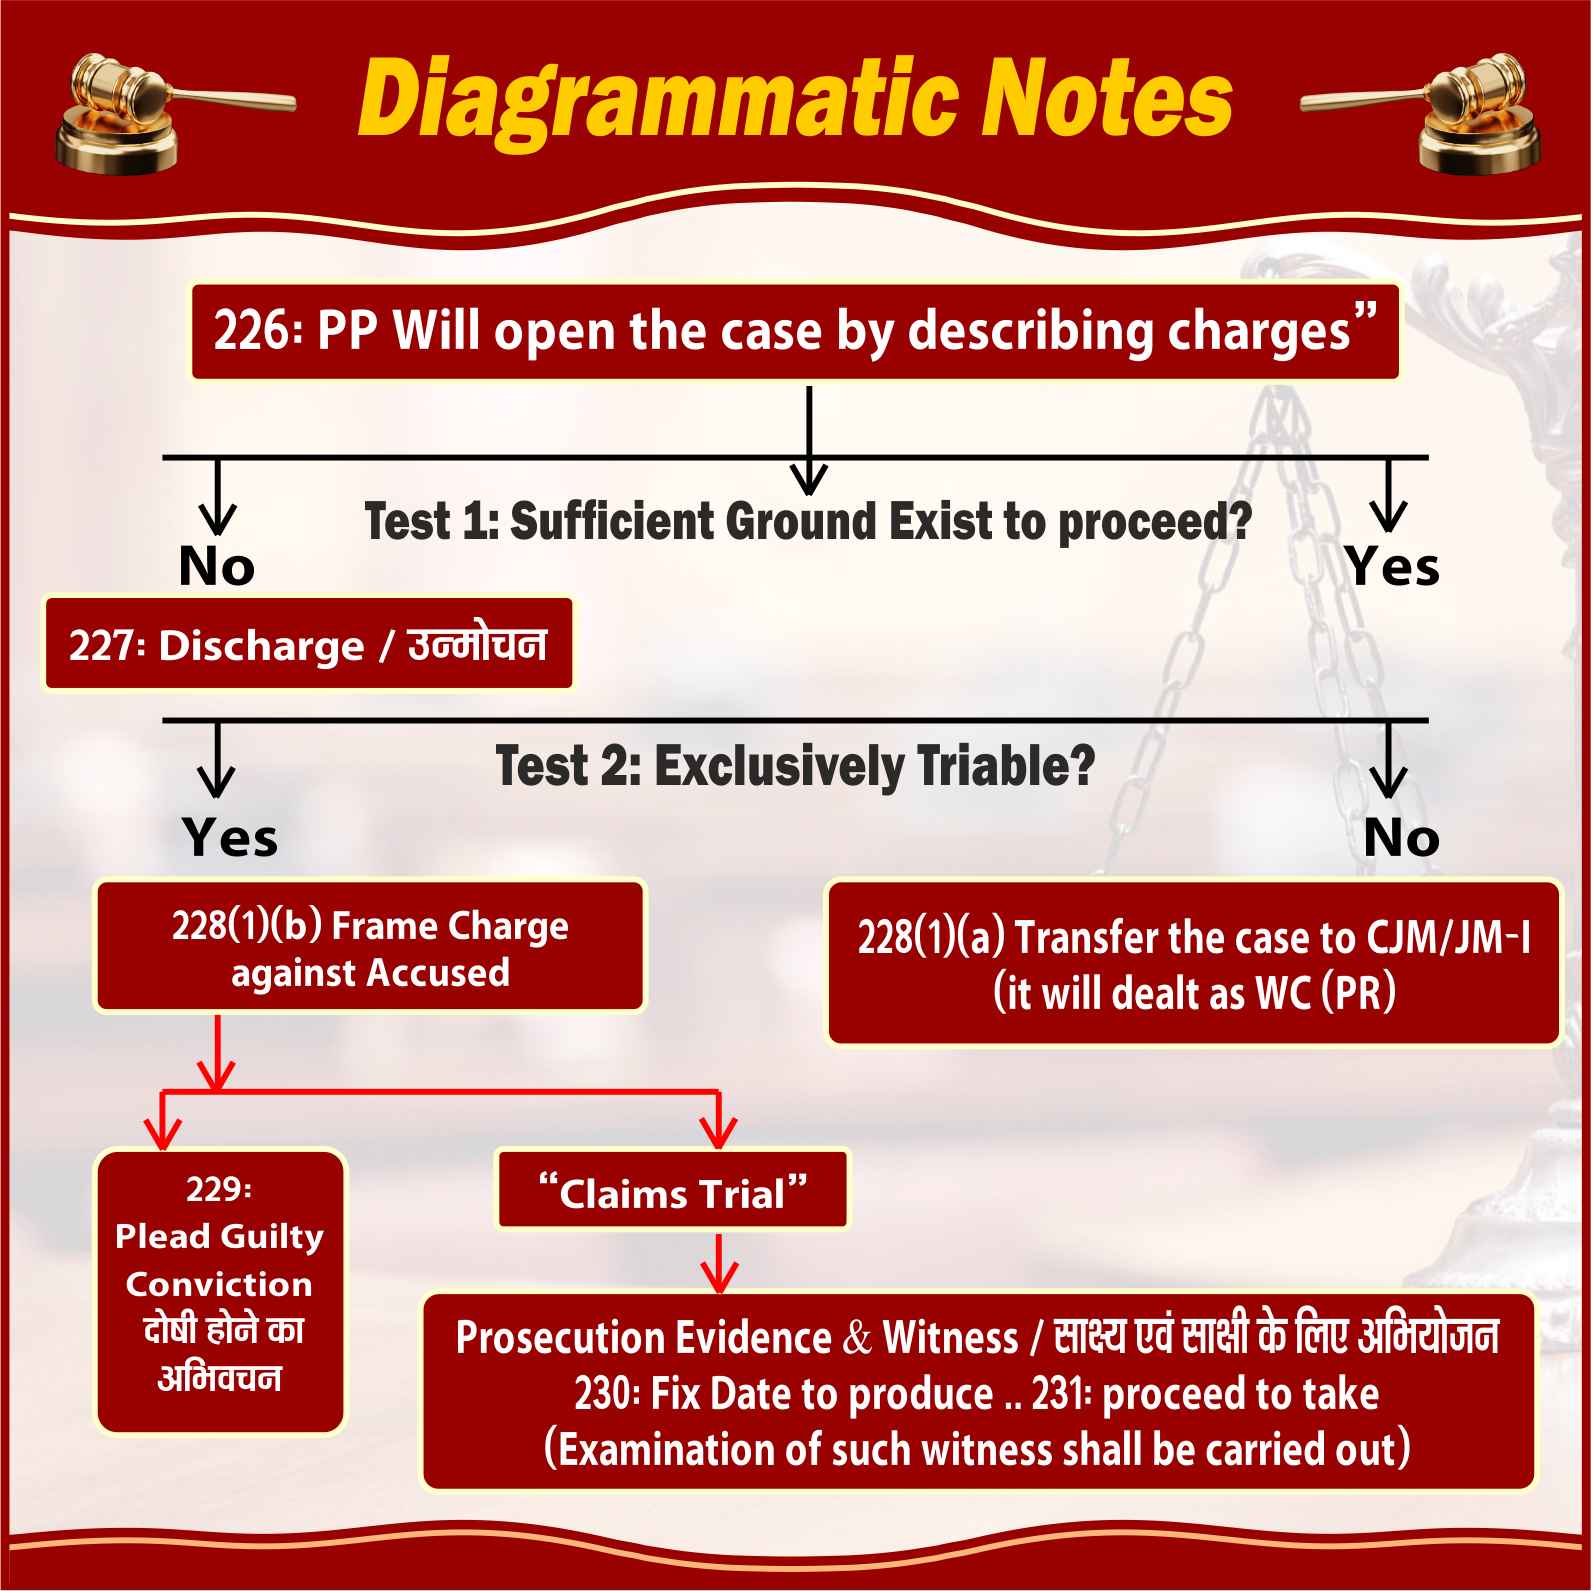 Diagrammatic style of notes making